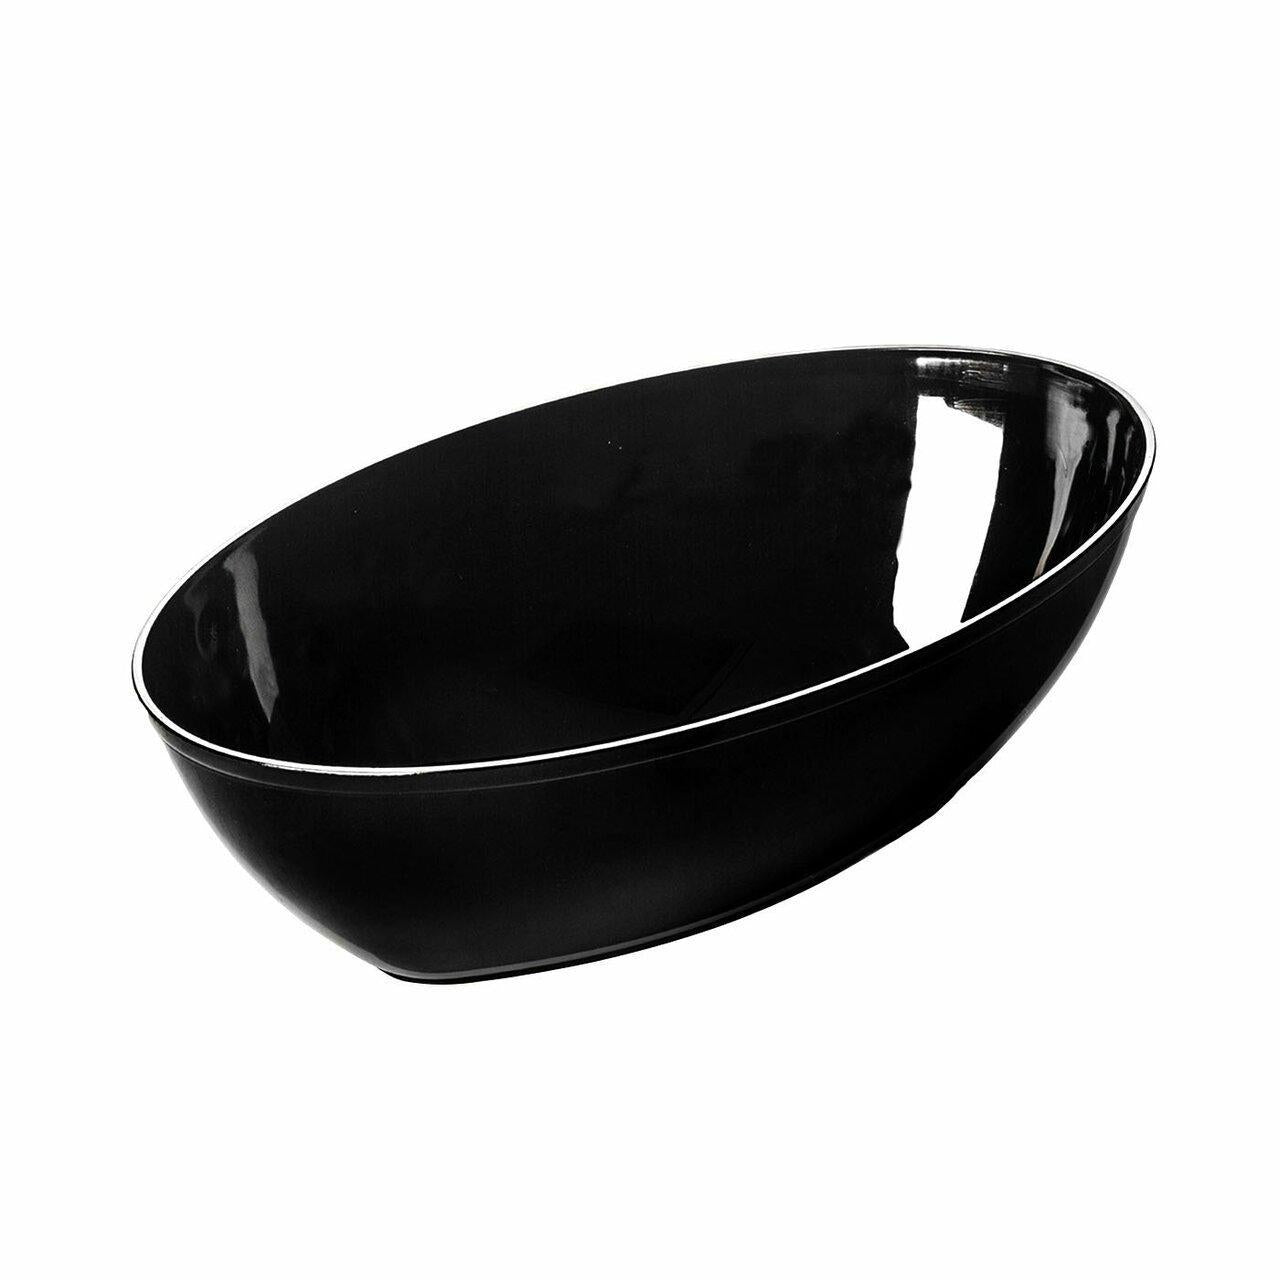 Black 64 oz. Oval Disposable Plastic Serving Bowls (3 Count) - Set With Style